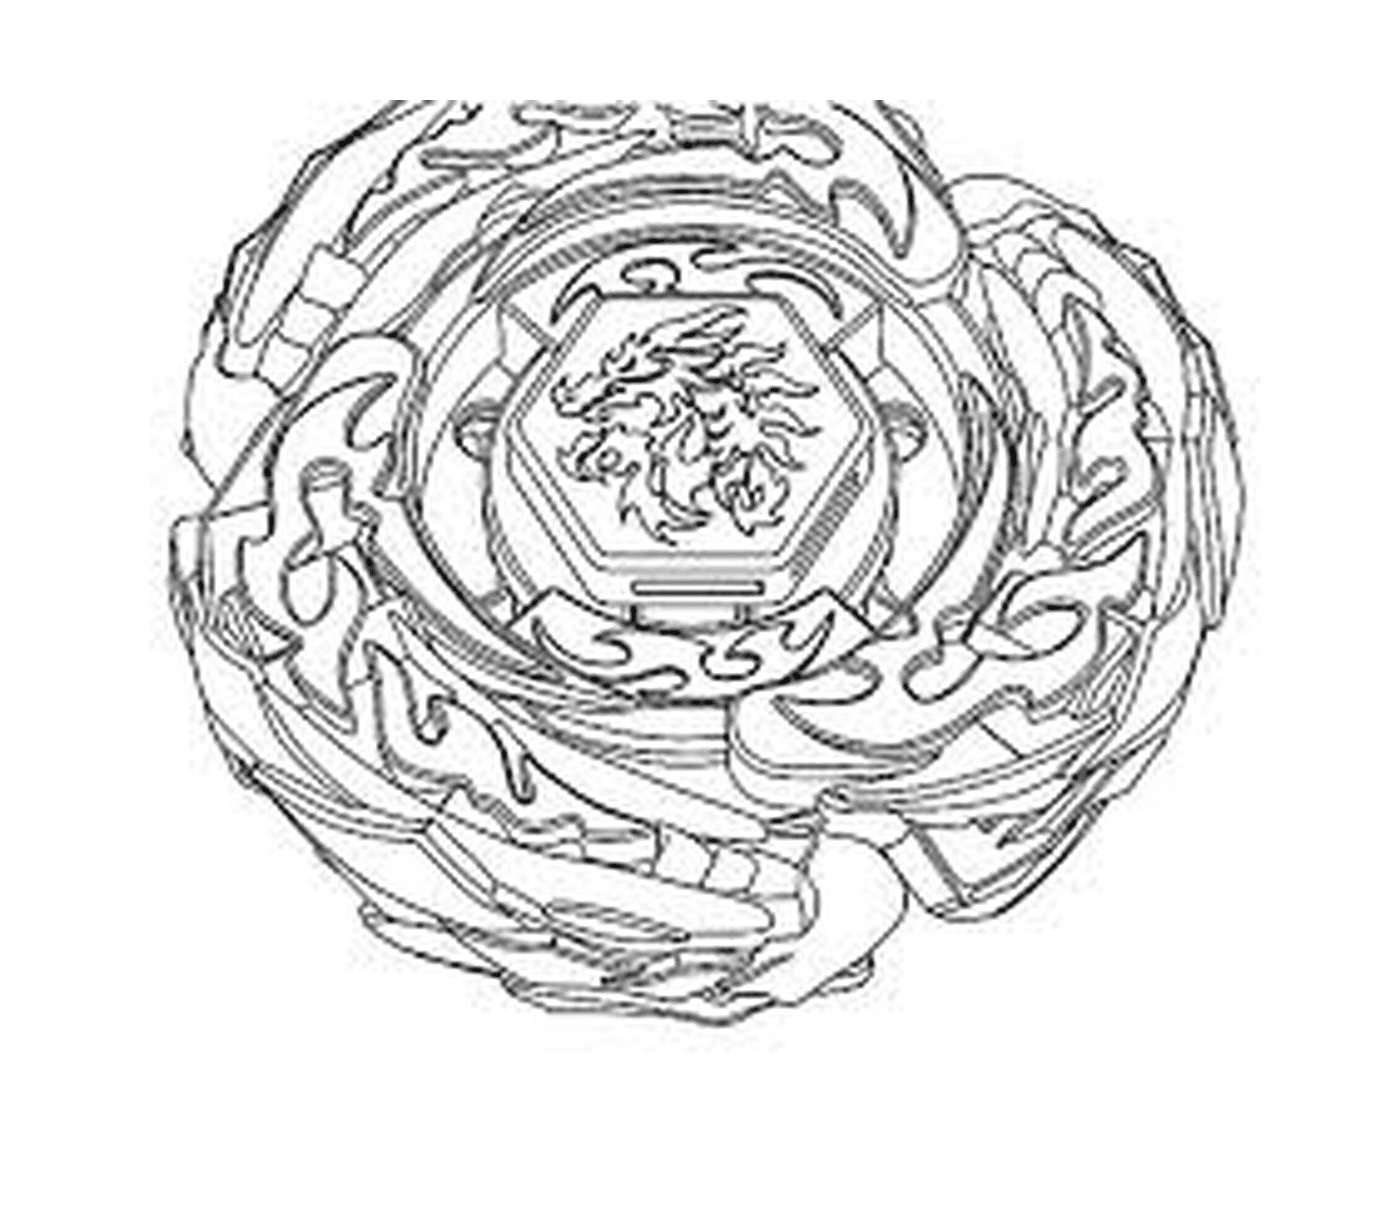  The image of a beyblade 